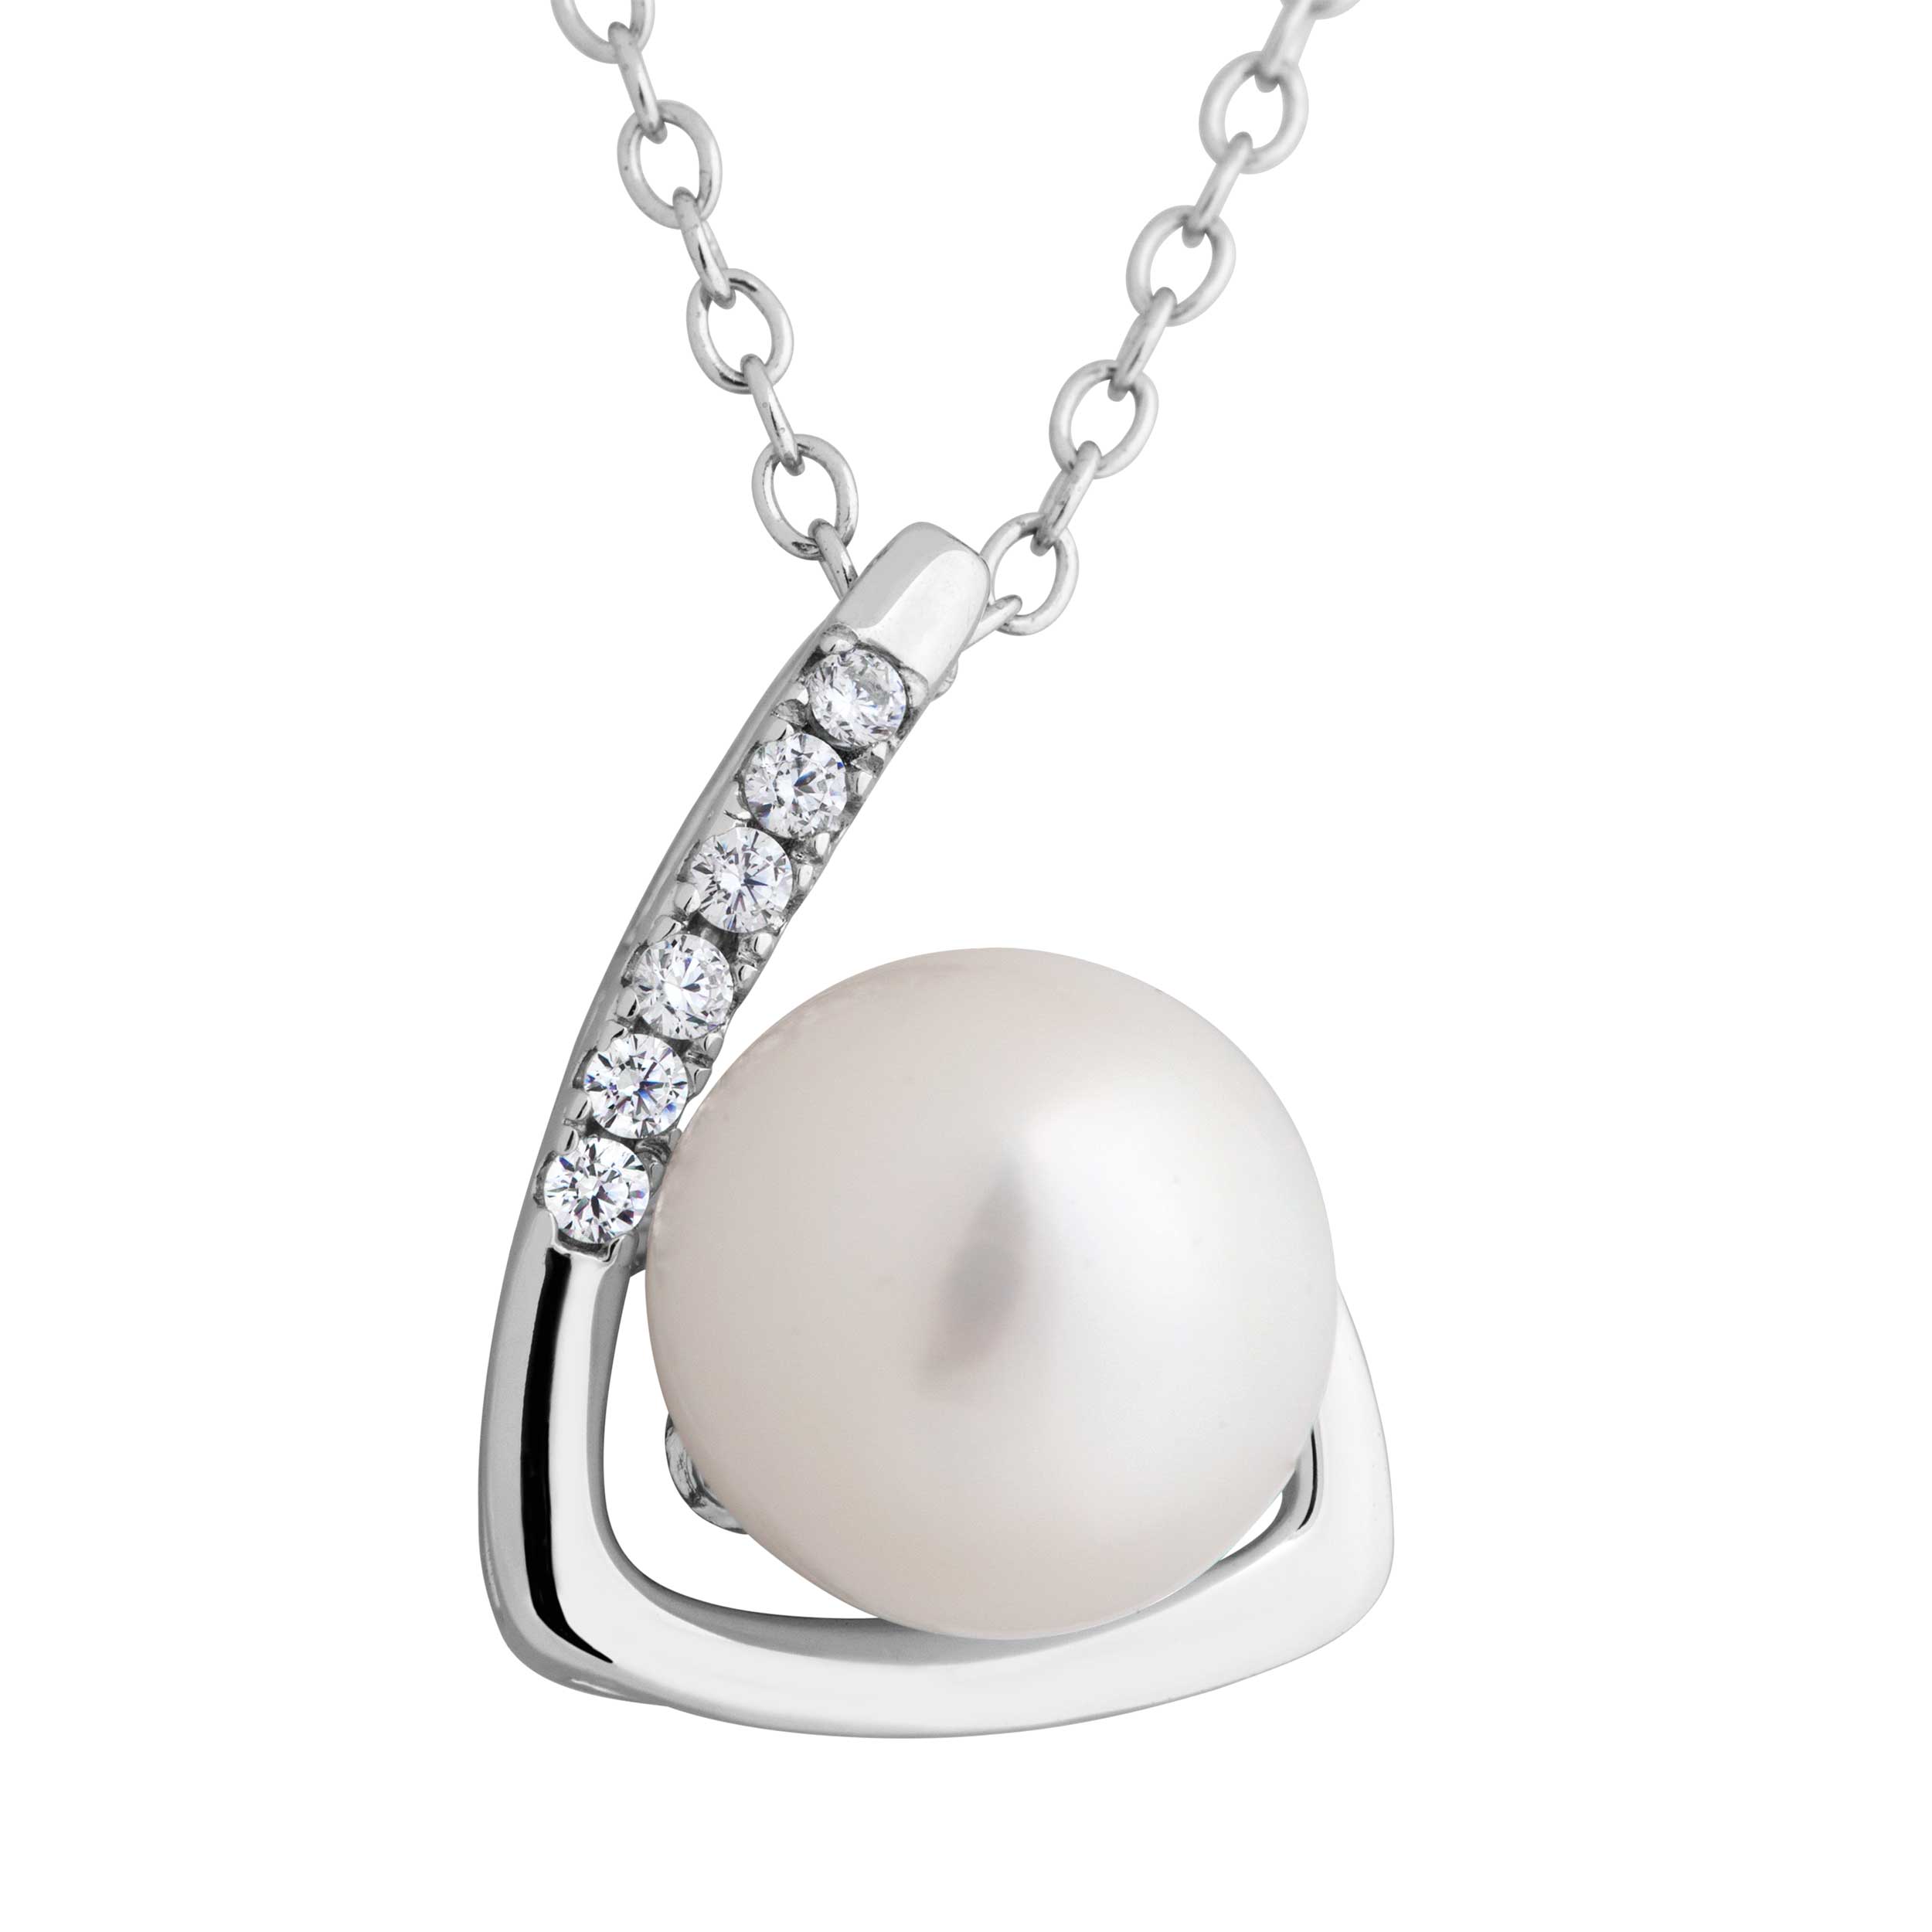 Lush Pearl with CZ's L Bar Pendant Necklace, Sterling Silver